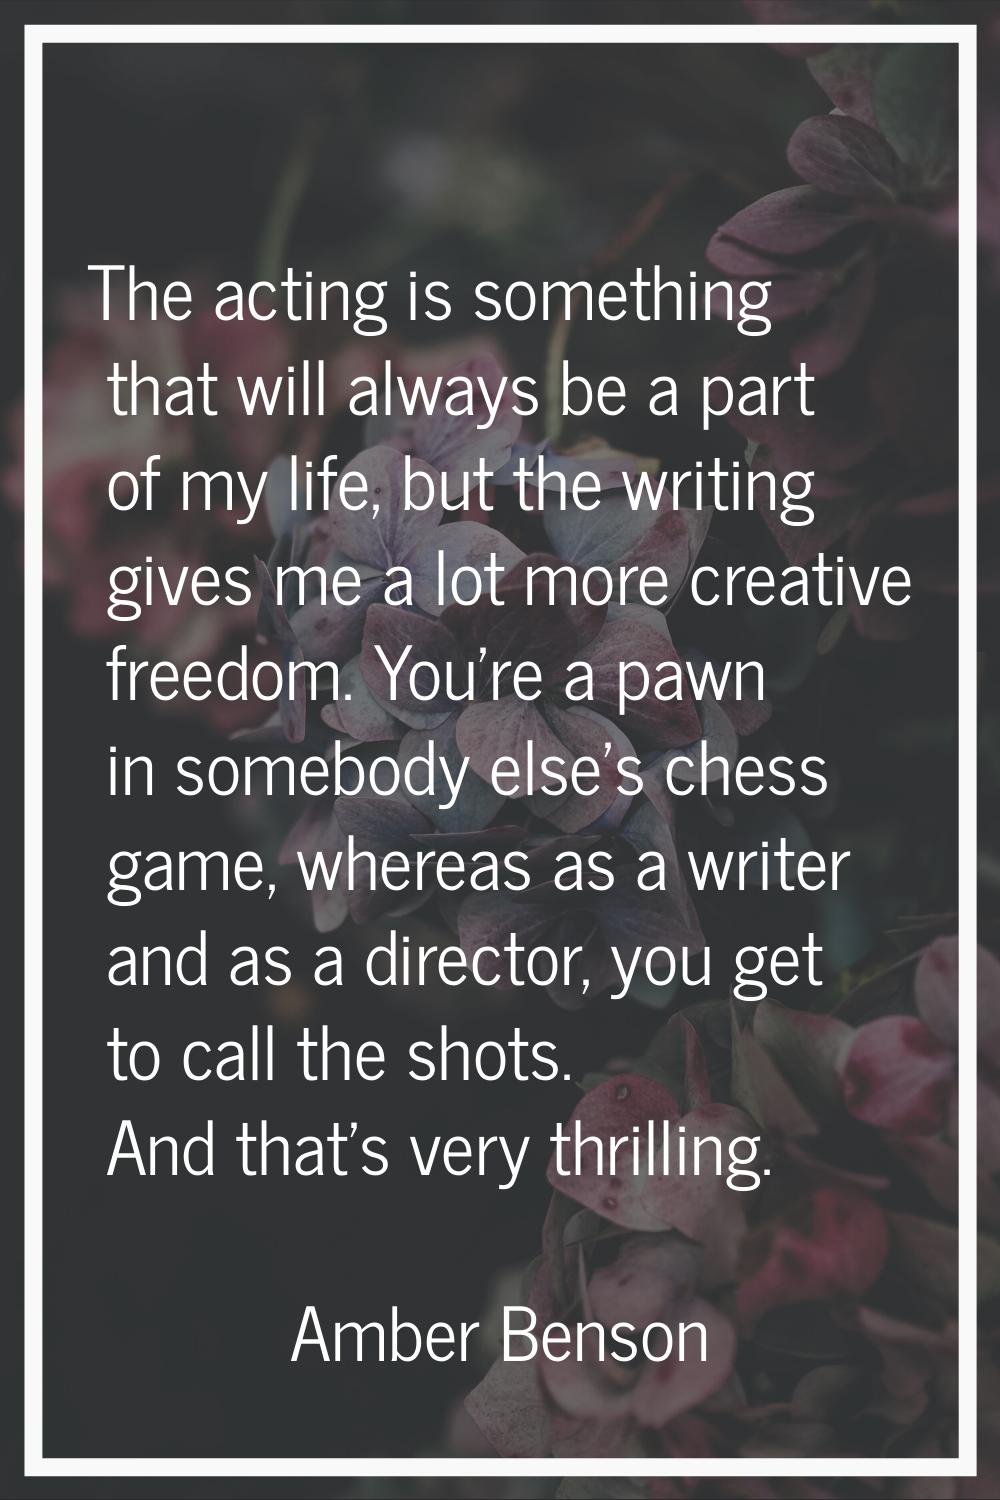 The acting is something that will always be a part of my life, but the writing gives me a lot more 